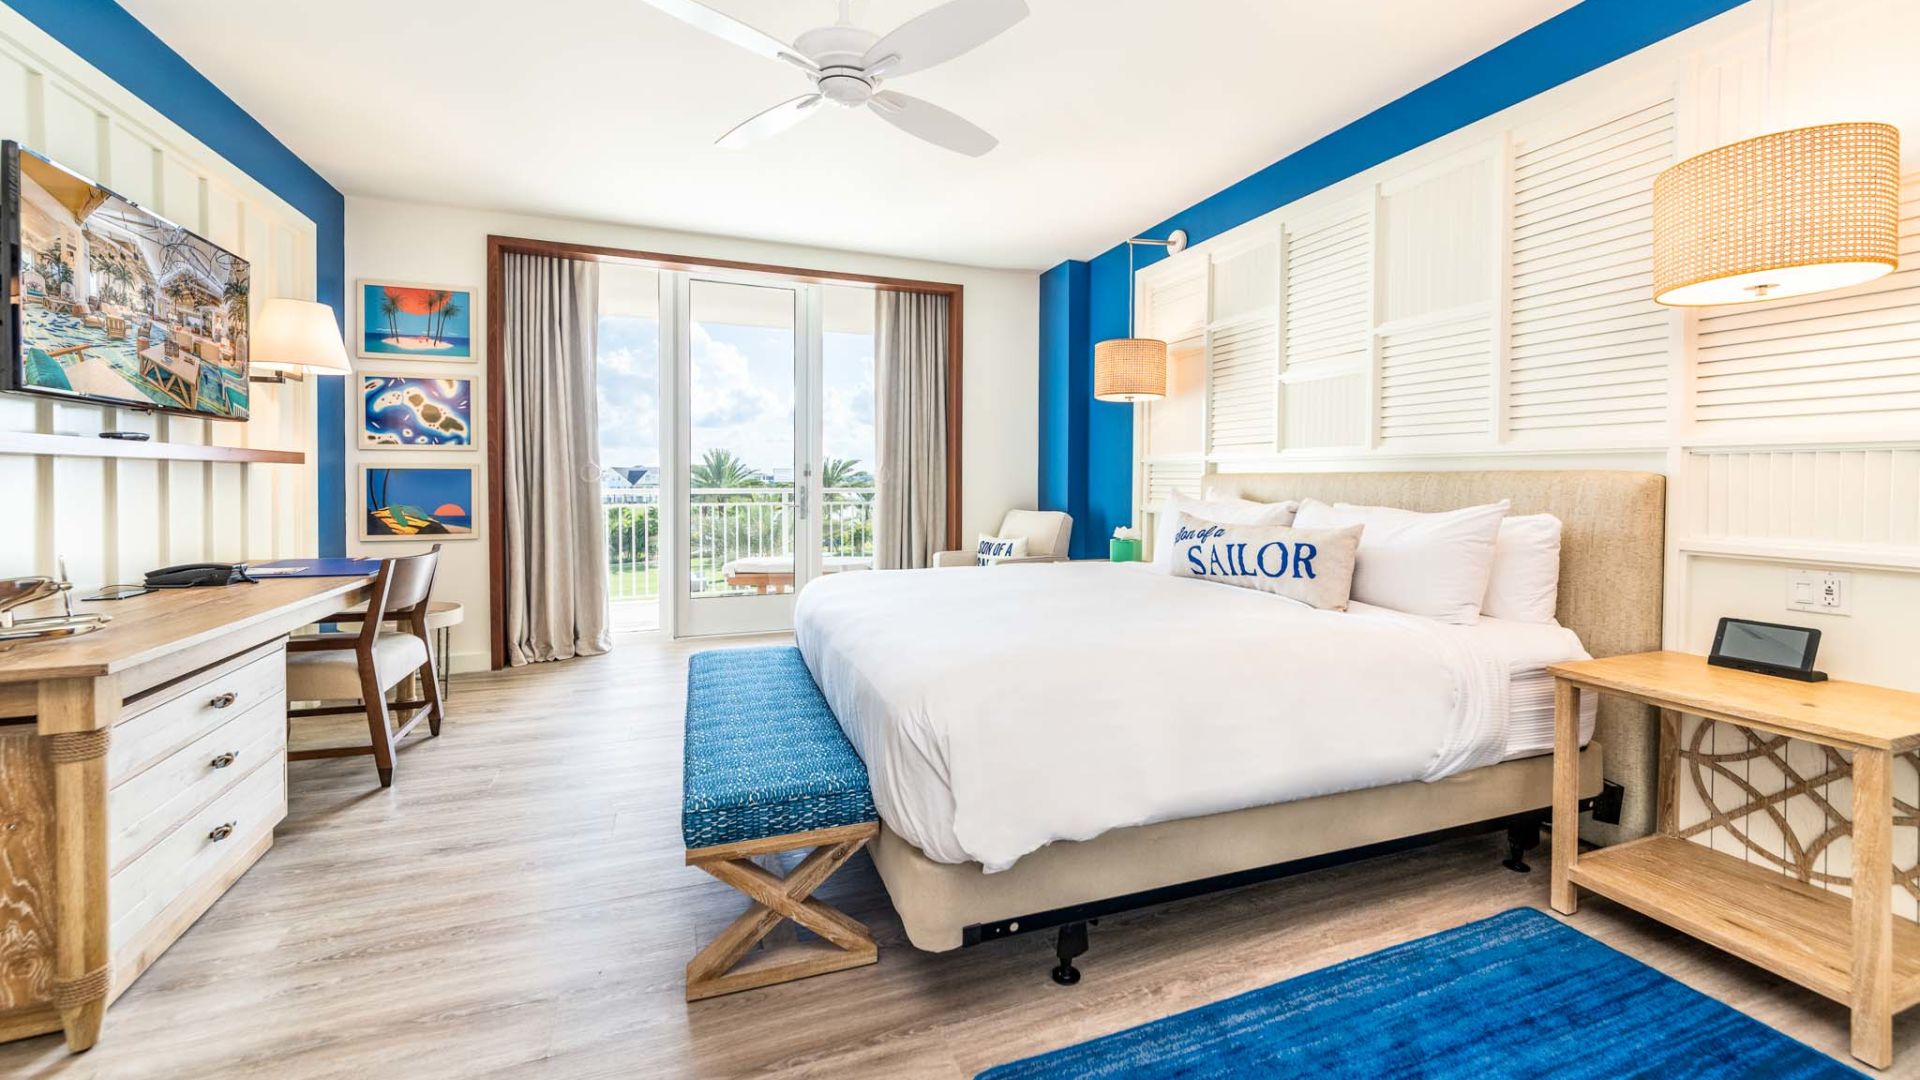 Large king bed and balcony access in an accessible Margaritaville Resort Orlando suite.